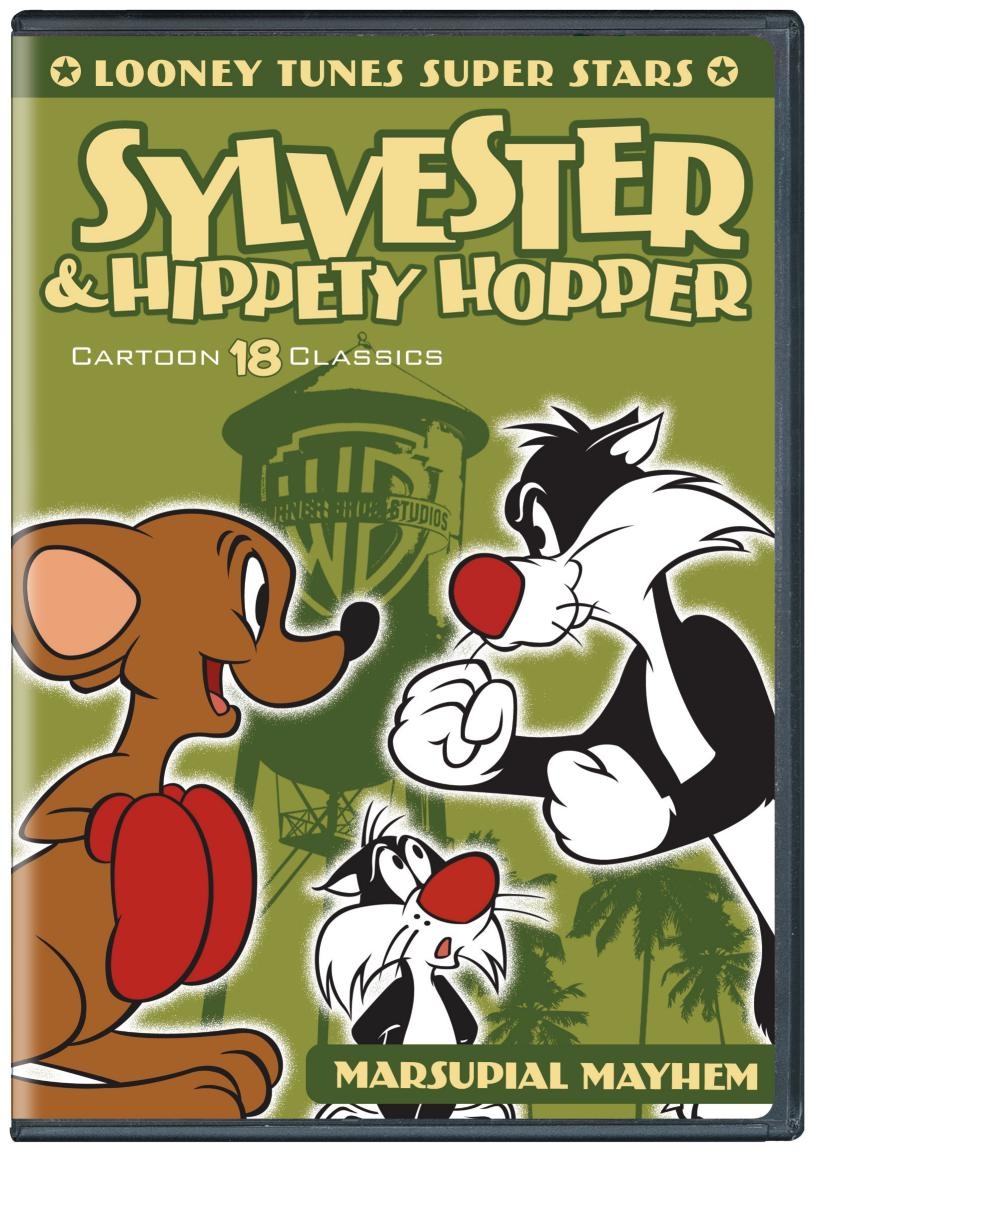 LOONEY TUNES SUPER STARS SYLVESTER & HIPPETY